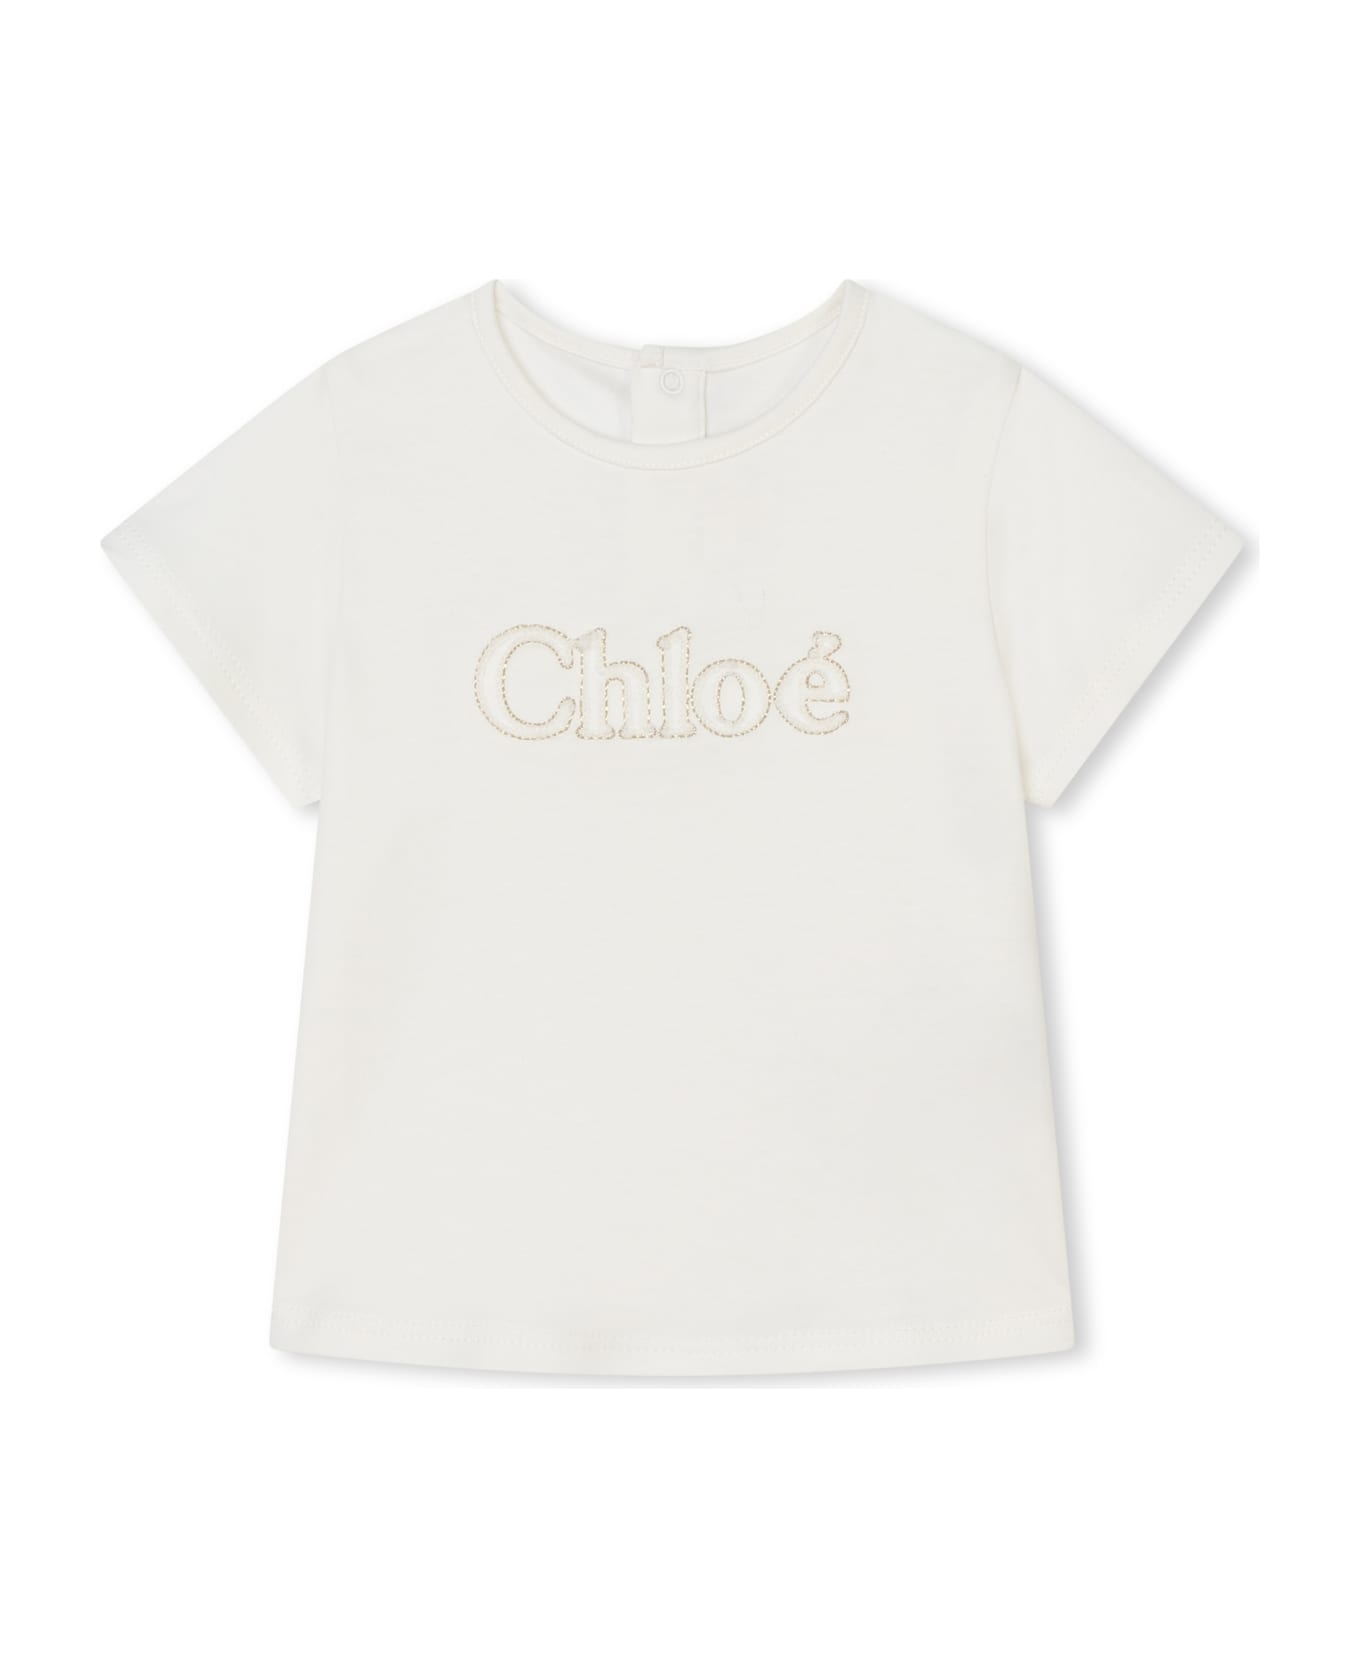 Chloé T-shirt With Print - White Tシャツ＆ポロシャツ